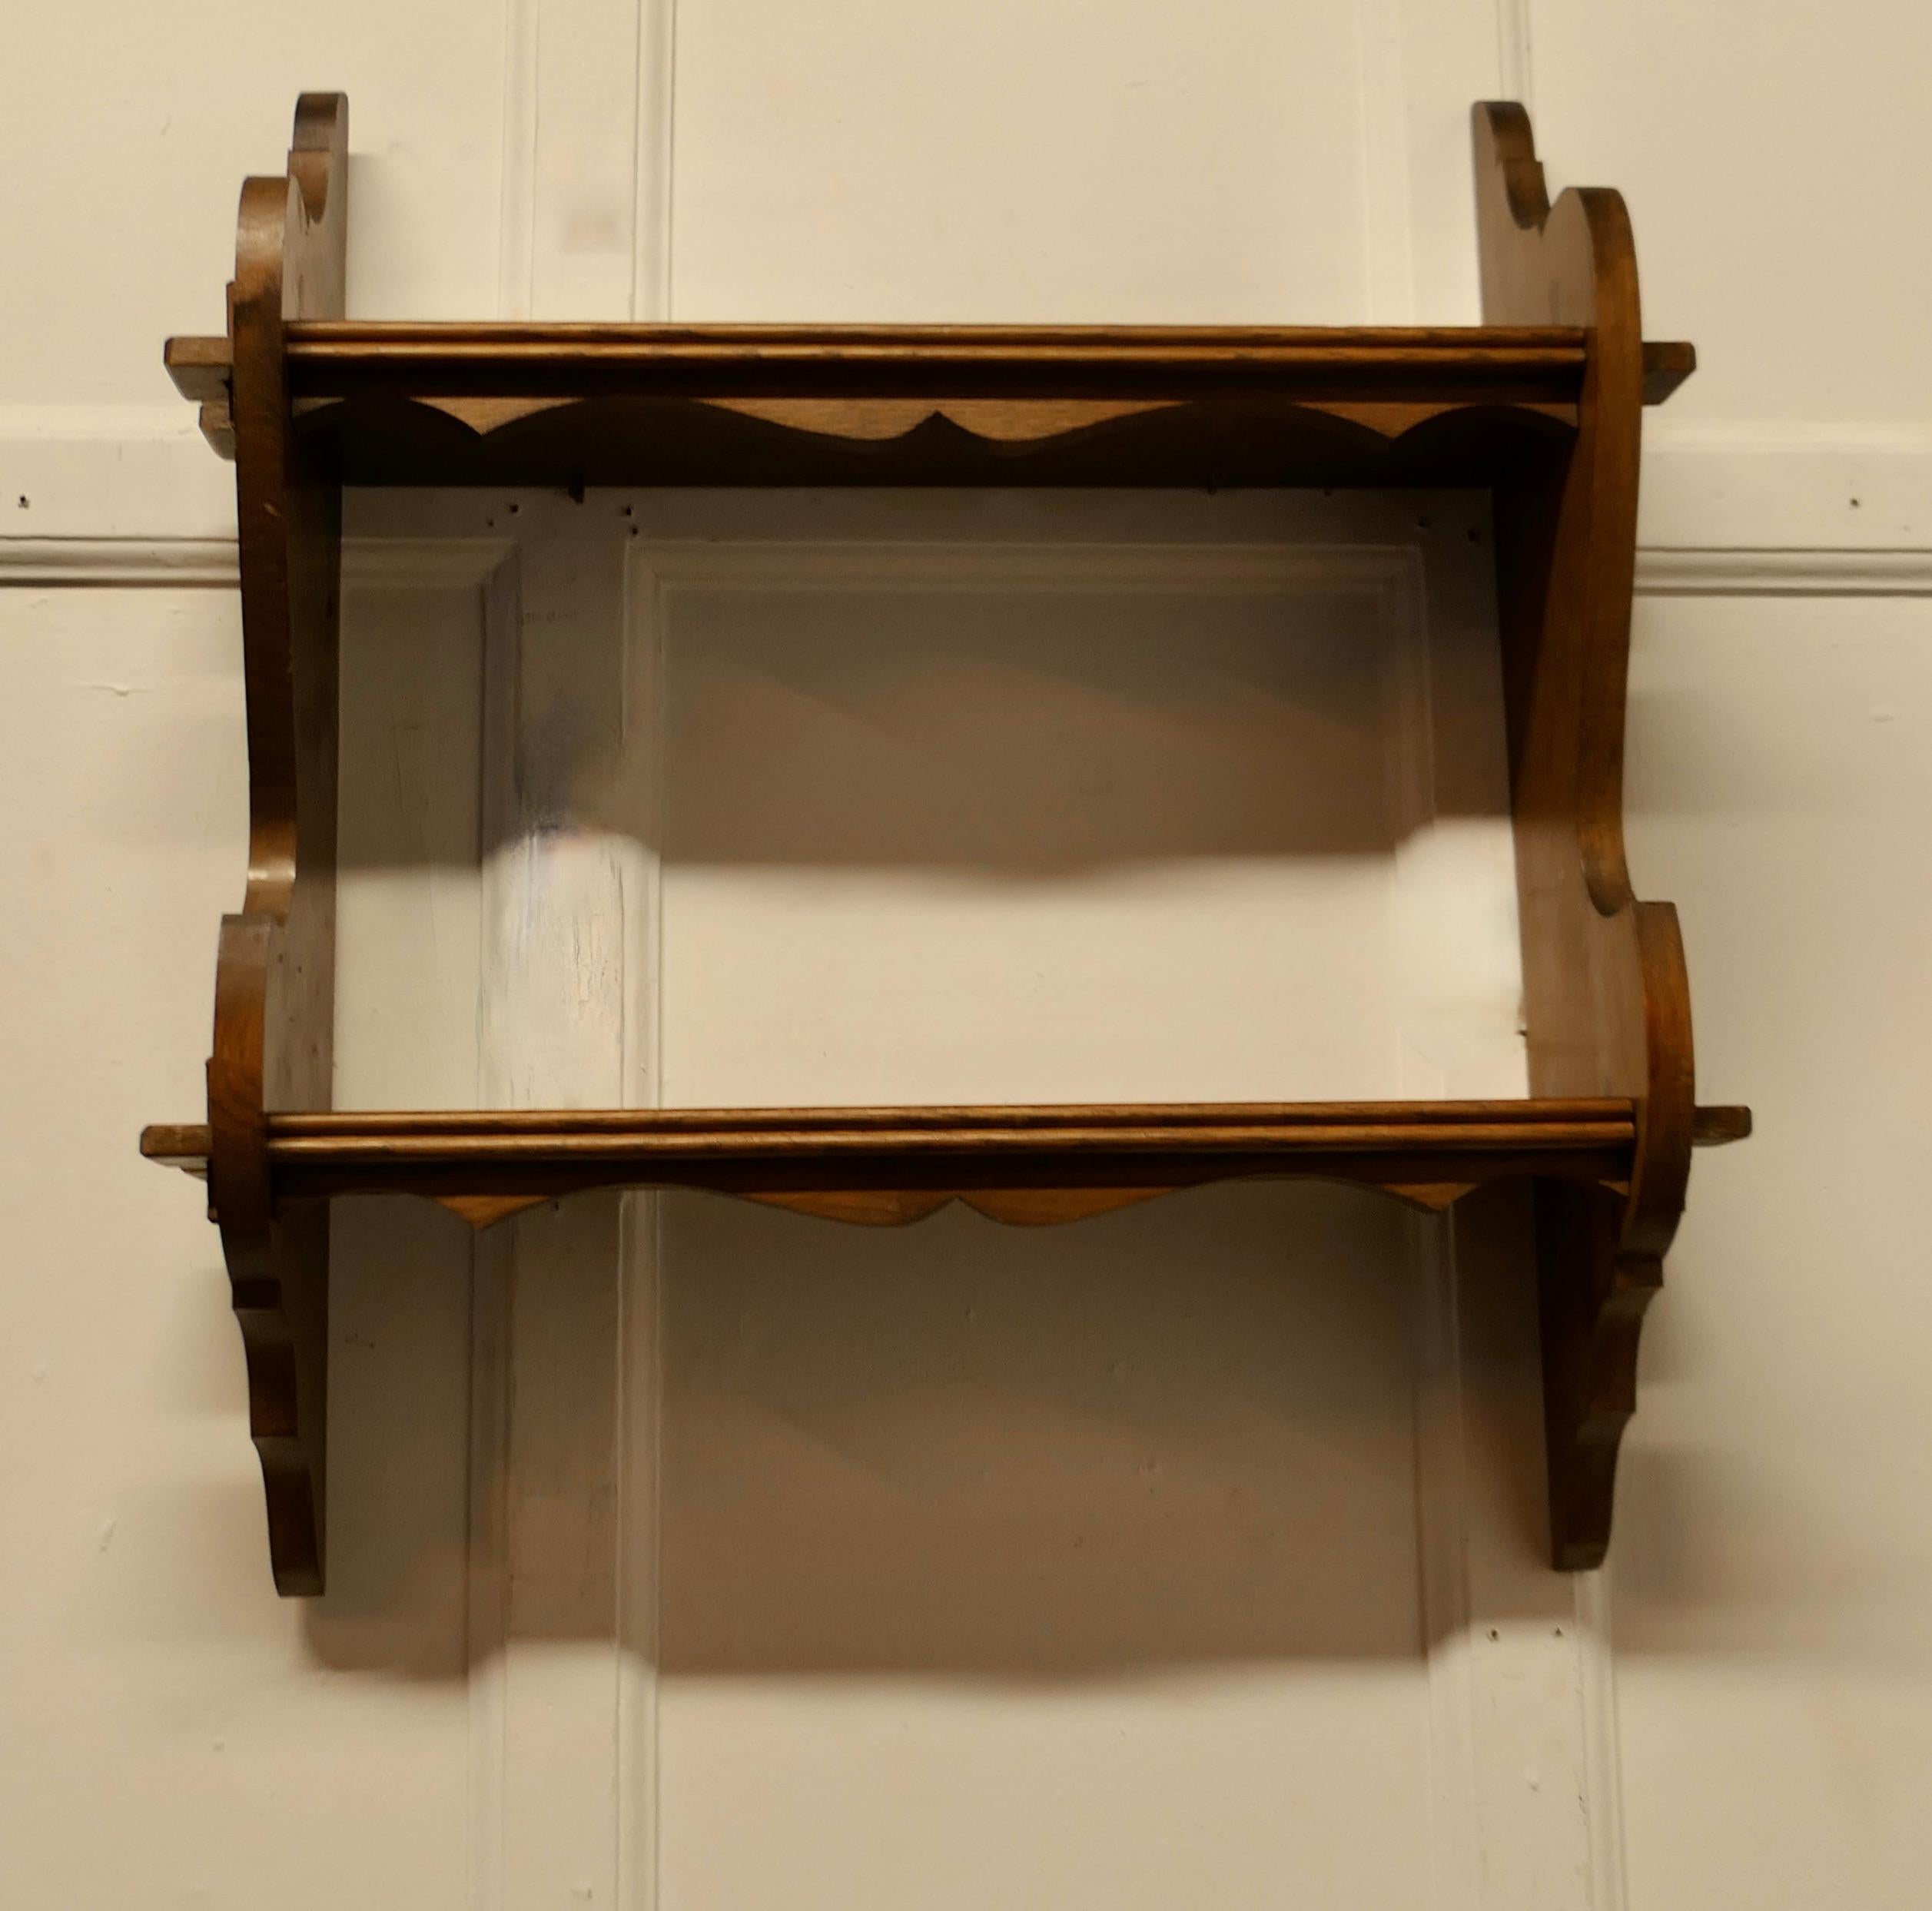 Oak Wall Hanging Book Shelf 

This charming little shelf unit, has 2 shelves with a scaloped apron under each
The shelf is in good condition and would work well in the Bathroom Kitchen or Bedroom 
The Shelf is 7” deep, 26” long and 28” high
TVY67